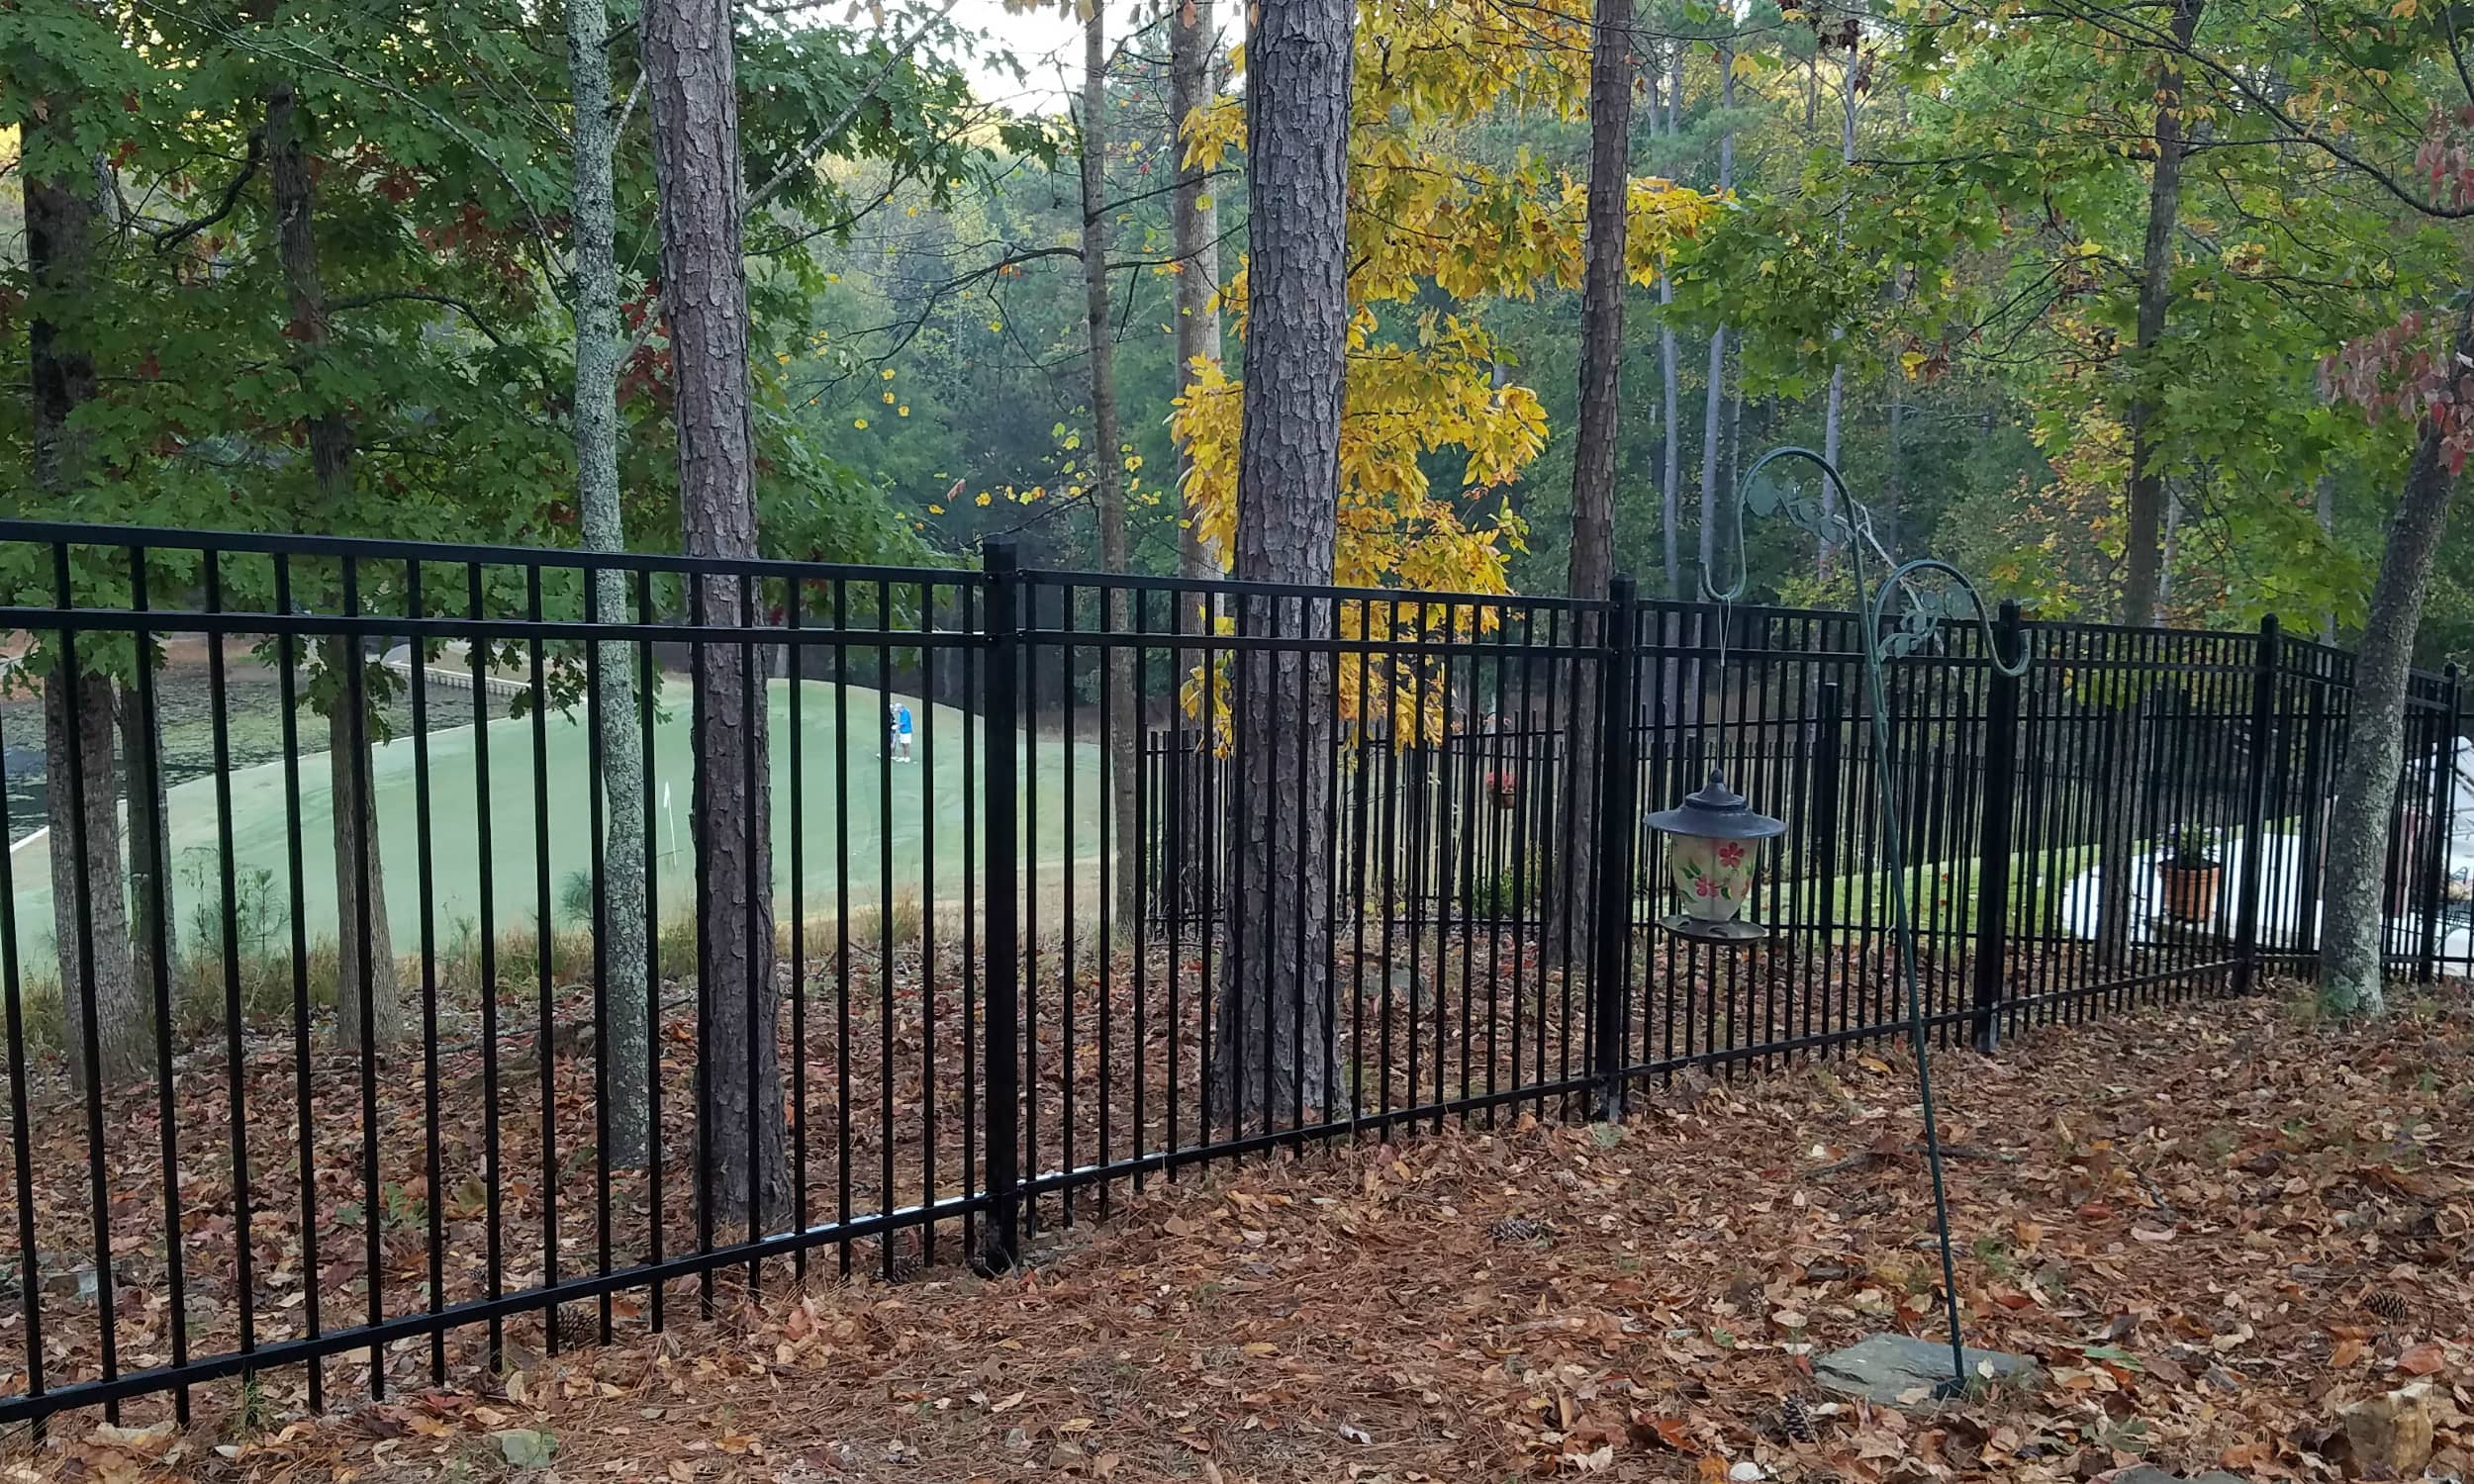 5 Ft Steel Fence with 3 Rails.jpg